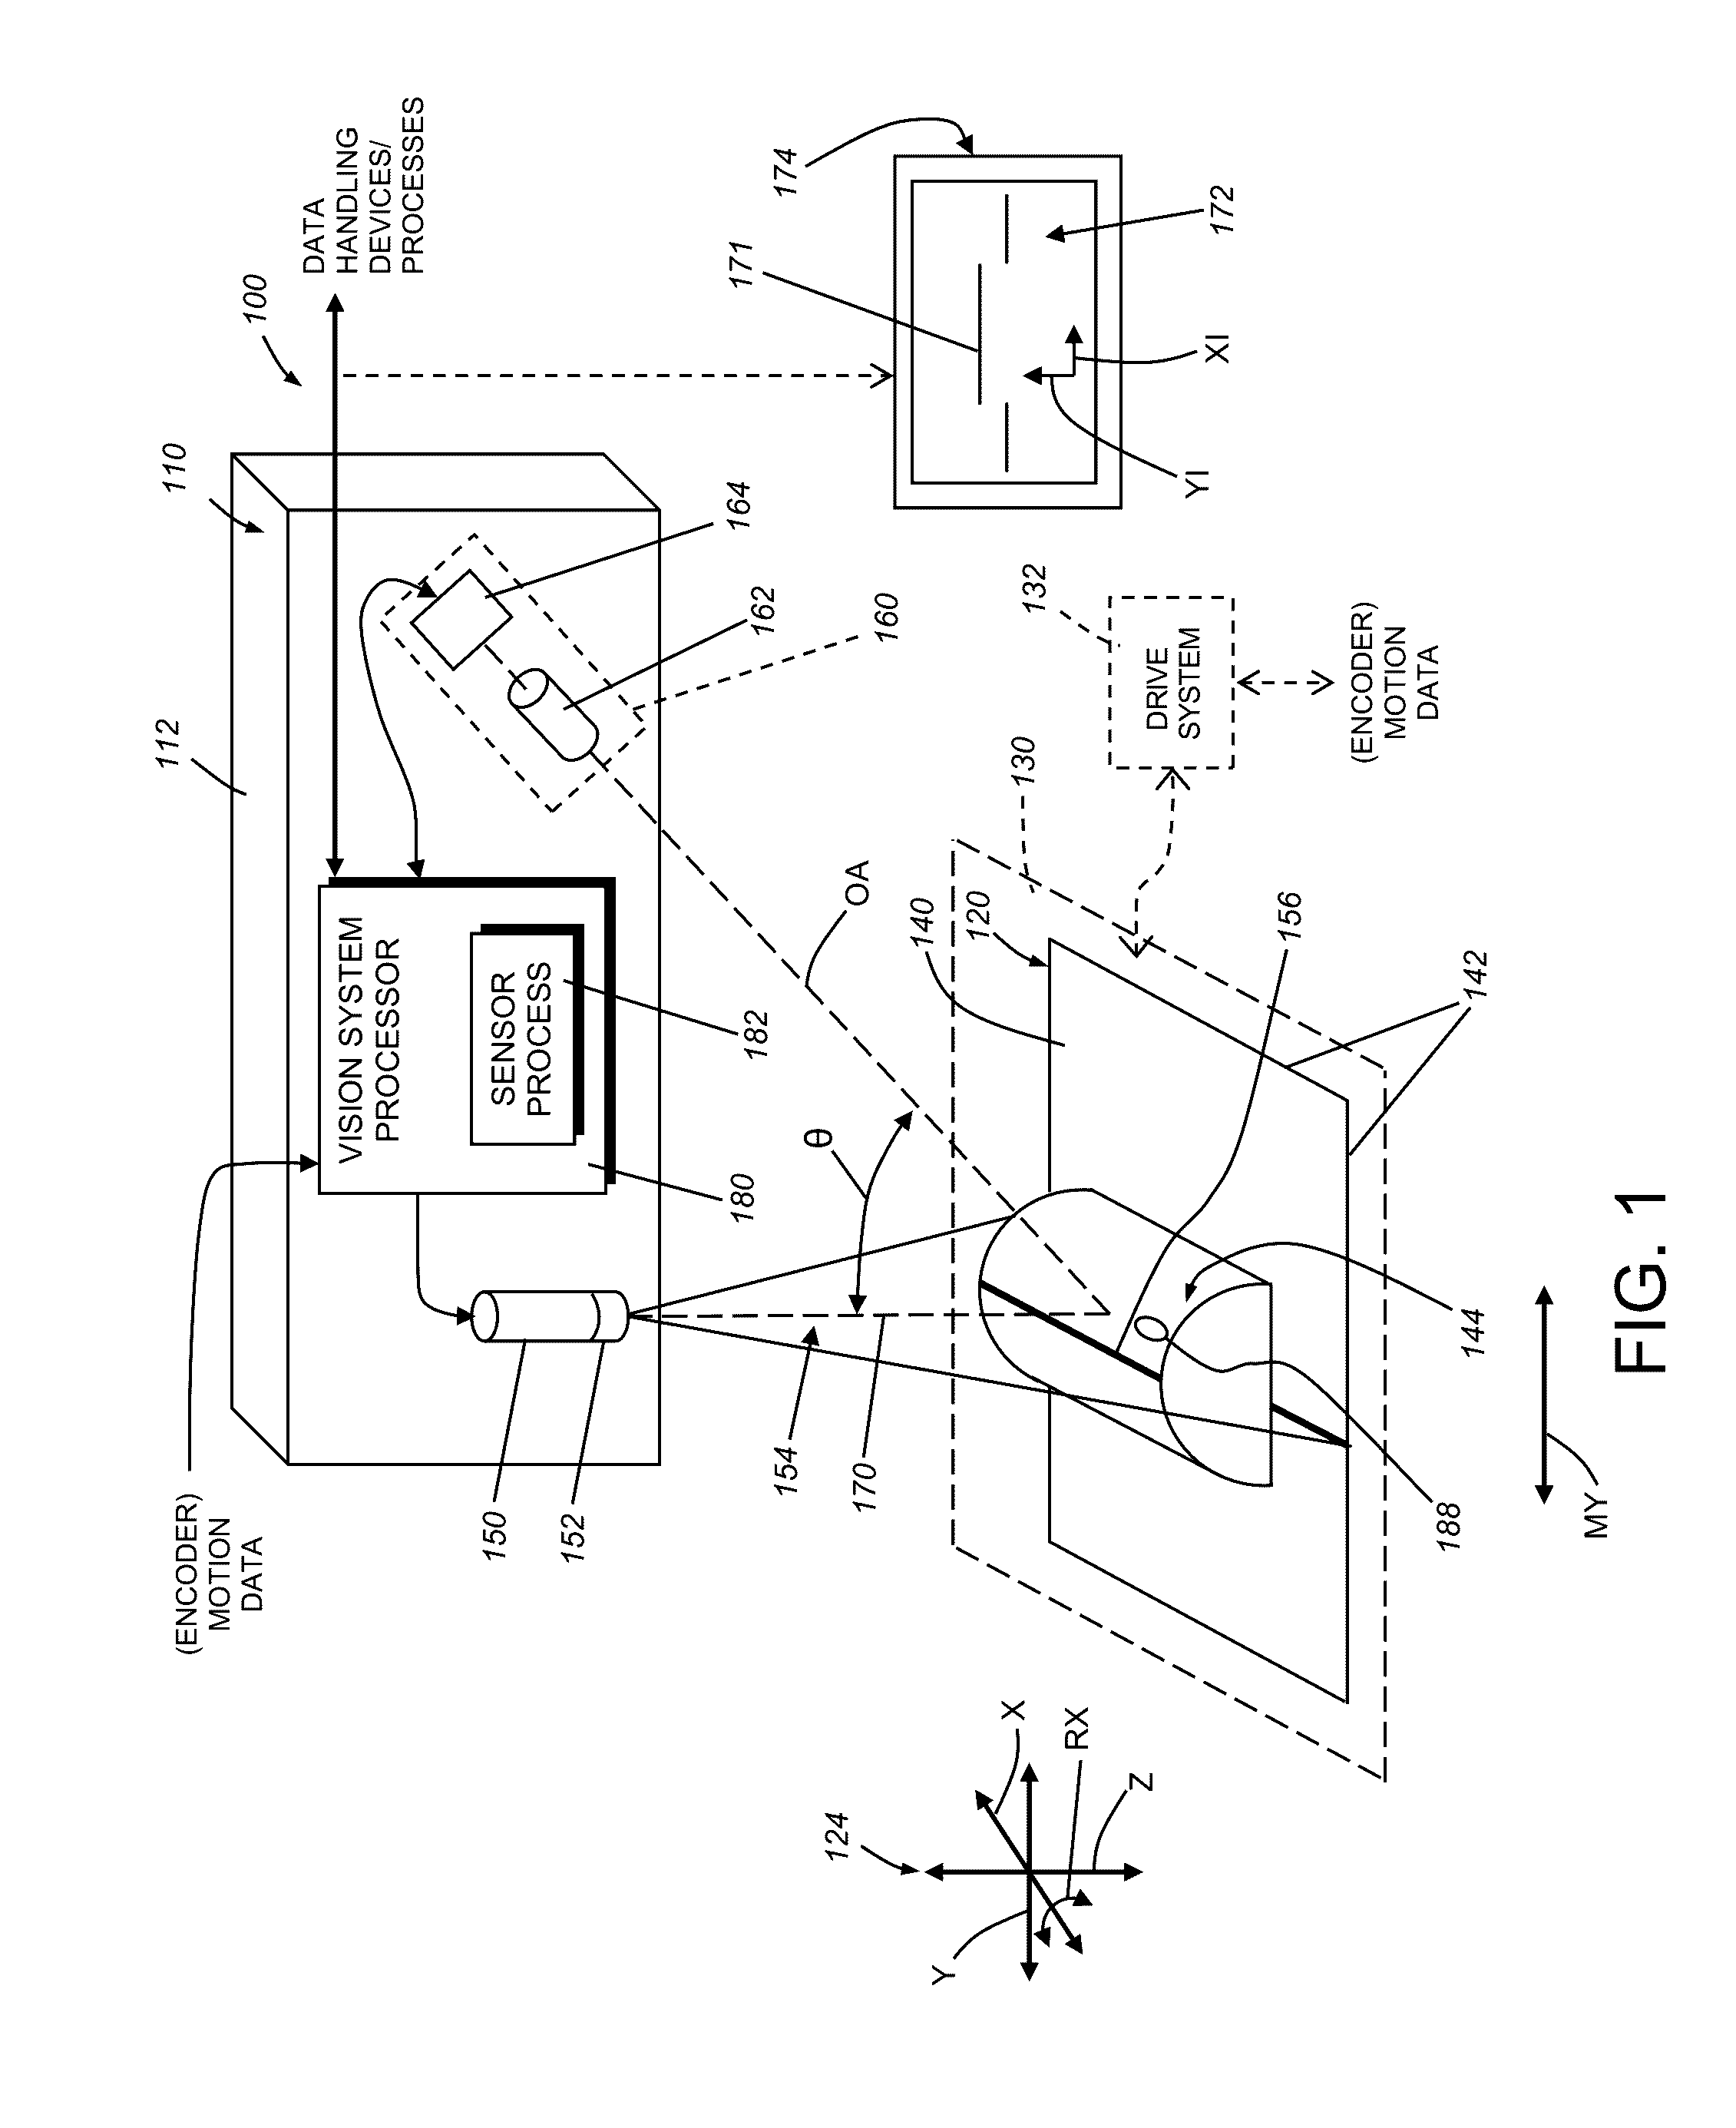 System and method for high-accuracy measurement of object surface displacement using a laser displacement sensor